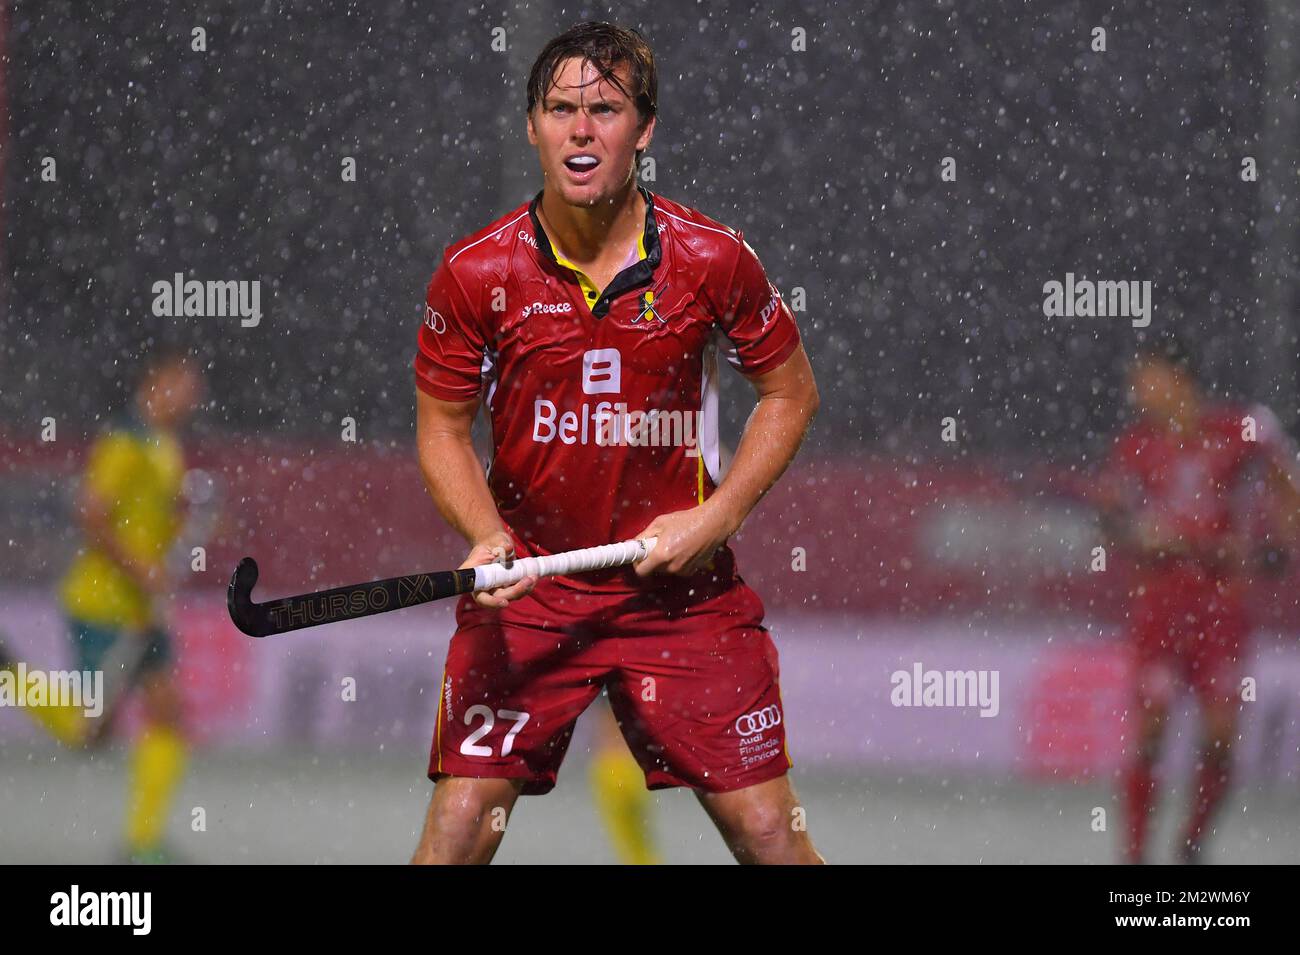 Belgium's Tom Boon pictured in the heavy rain during a field hockey game between Belgium's national team Red Lions and Australia, Wednesday 19 June 2019 in Wilrijk, Antwerp, game 13/14 of the men's FIH Pro League competition. BELGA PHOTO LUC CLAESSEN Stock Photo